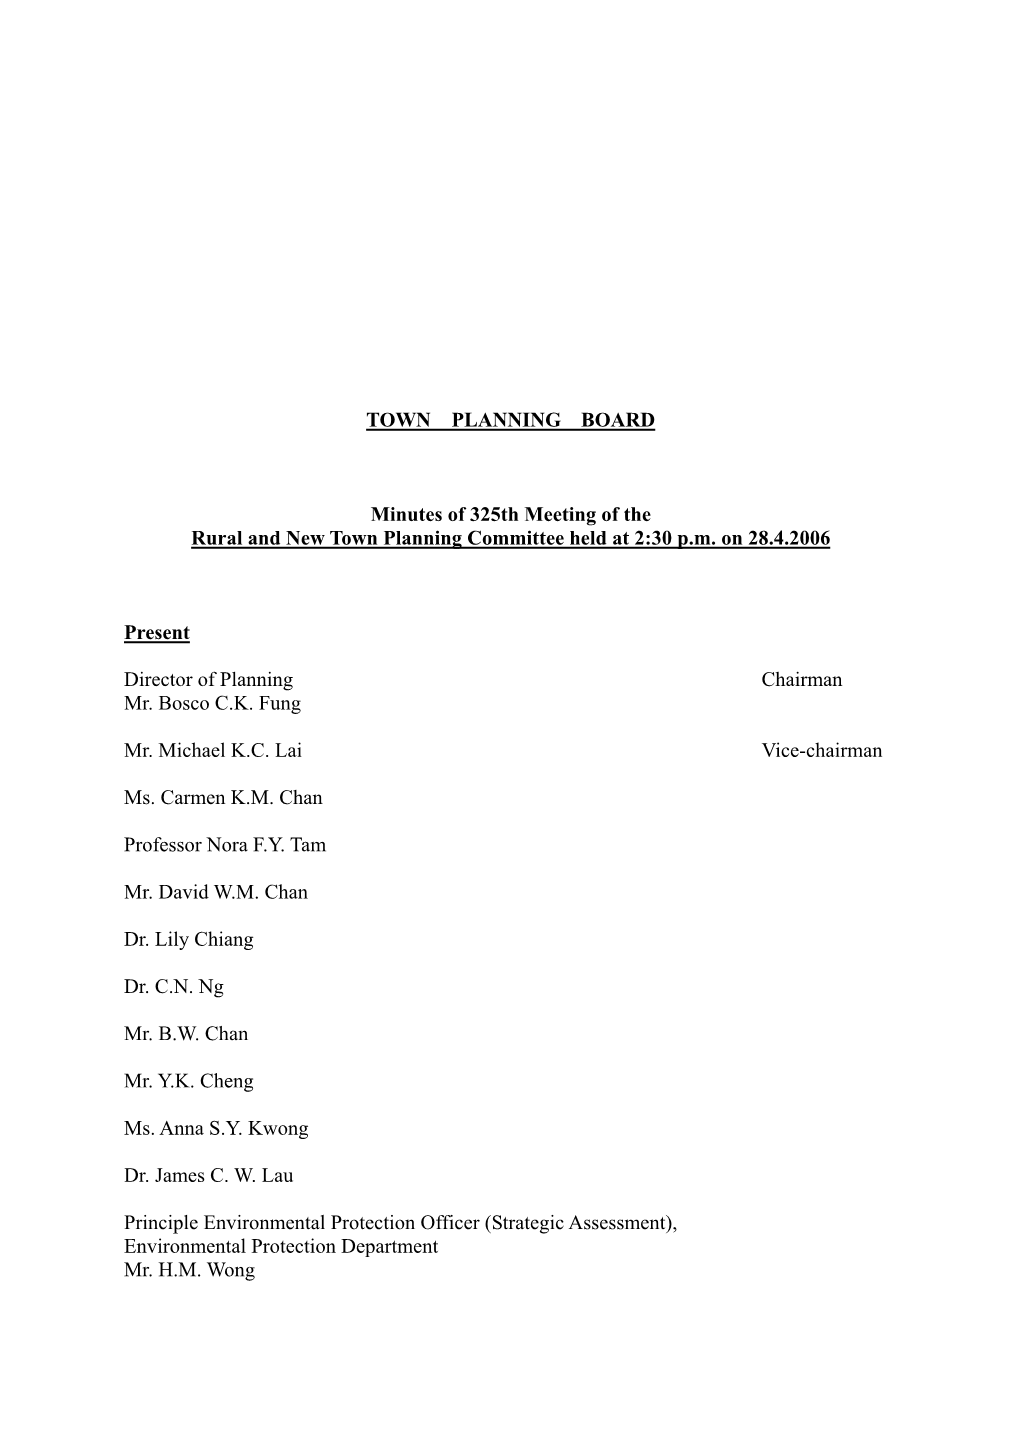 TOWN PLANNING BOARD Minutes of 325Th Meeting of the Rural And